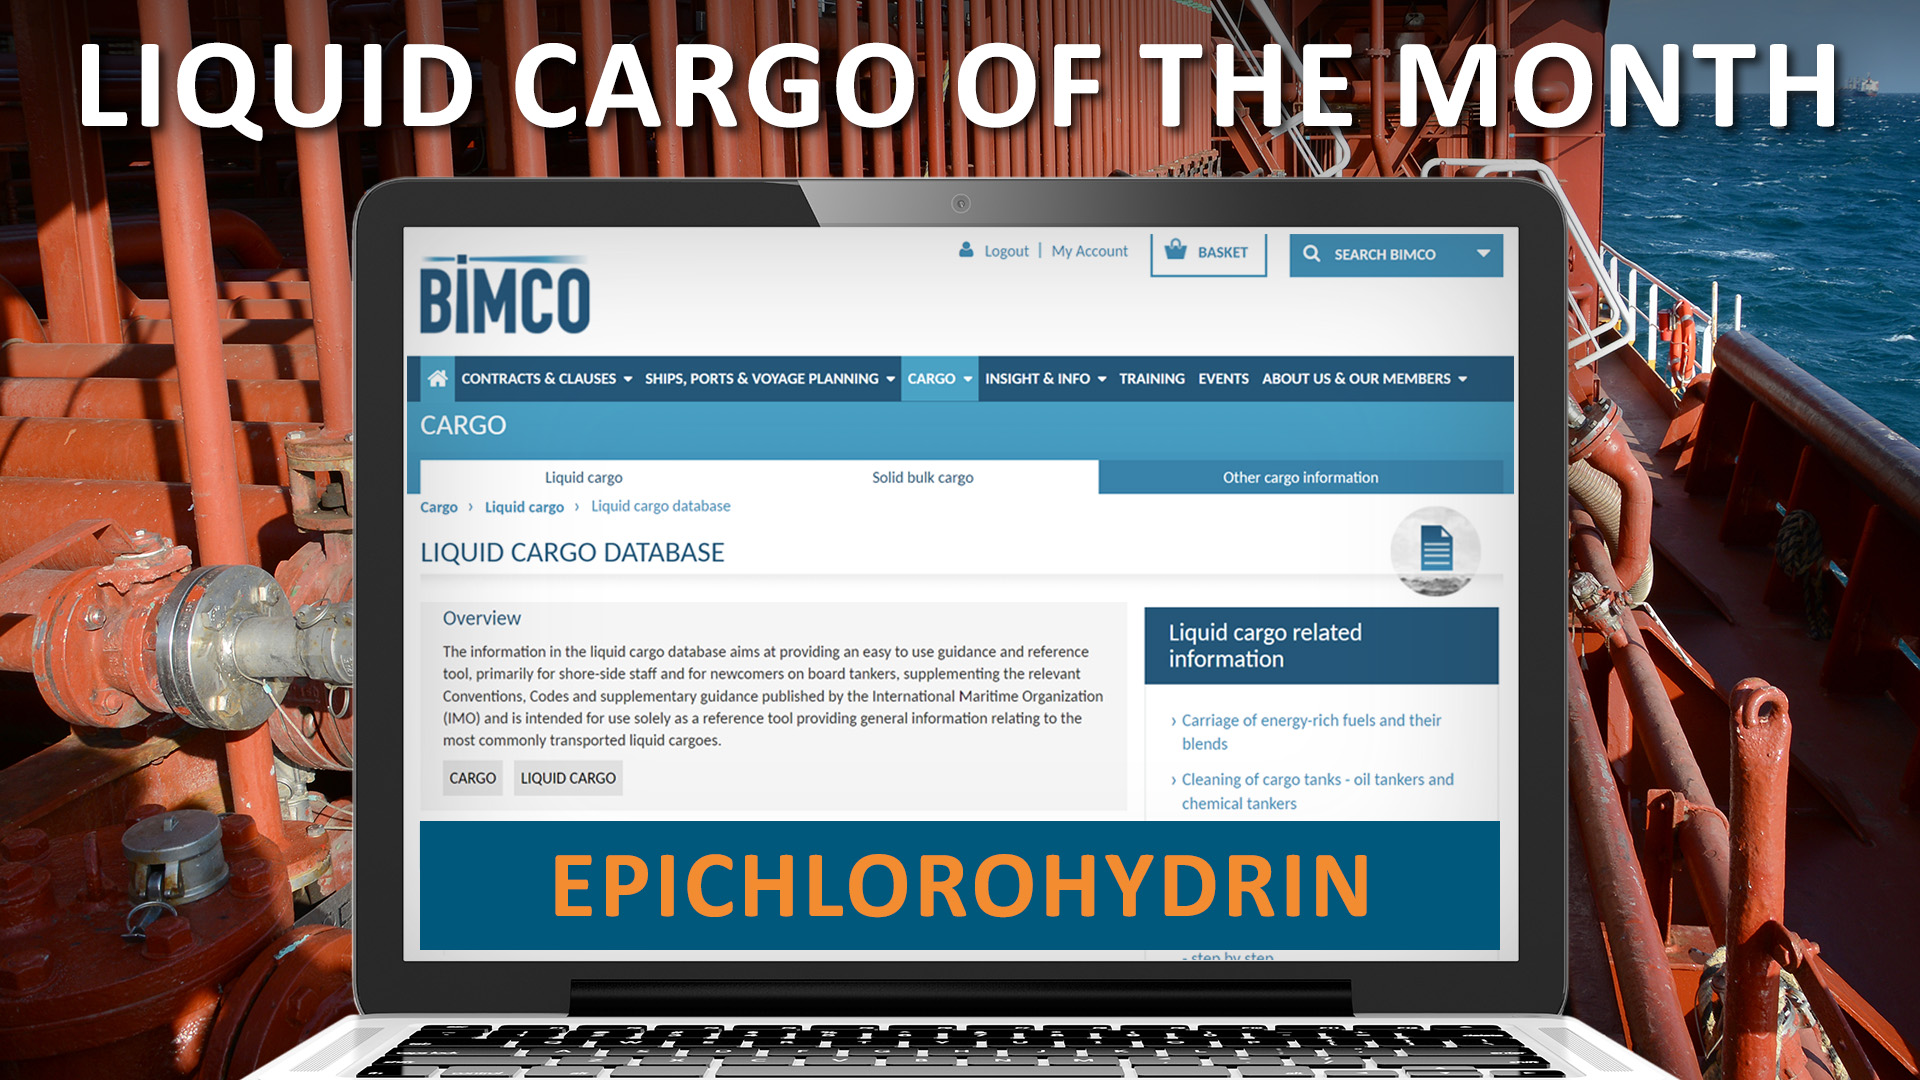 Liquid cargo of the month - BIMCO Liquid Cargo Database website and the text "Epichlorohydrin" on laptop superimposed over photo of chemical tanker deck